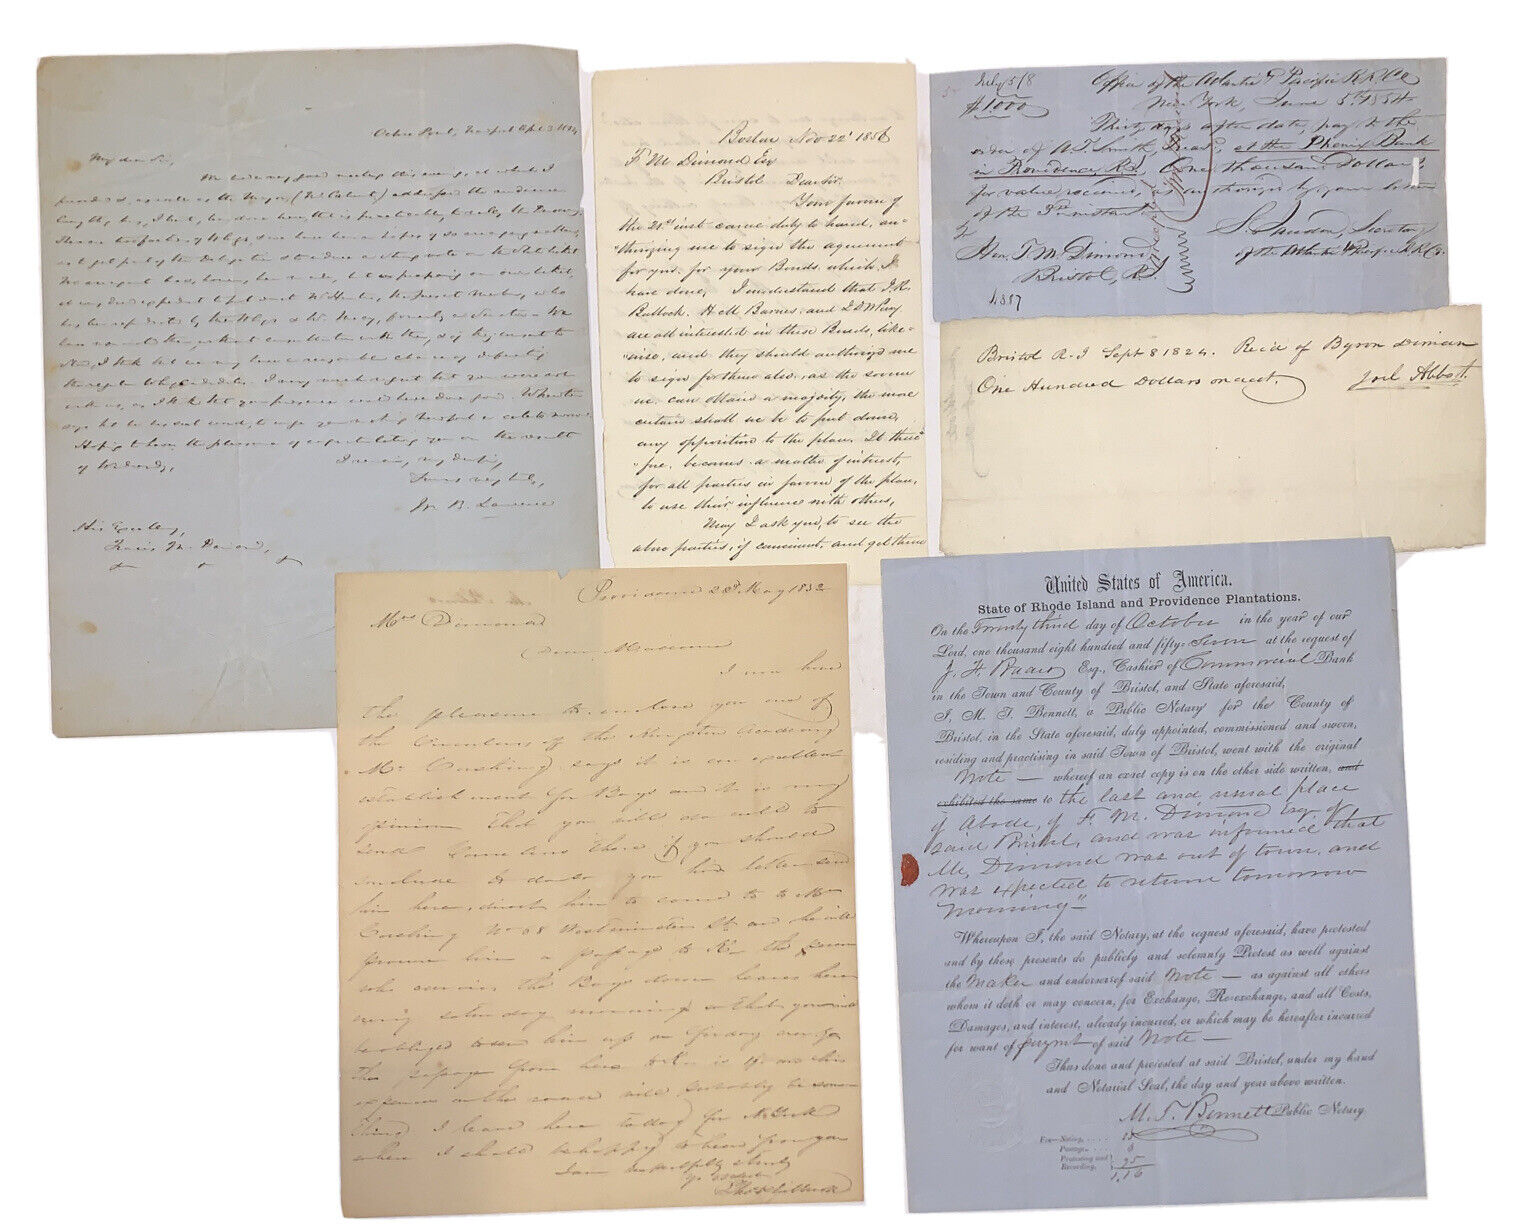 1824-1857, MANUSCRIPT ARCHIVE RELATED TO RHODE ISLAND GOVERNOR, FRANCIS M DIMOND